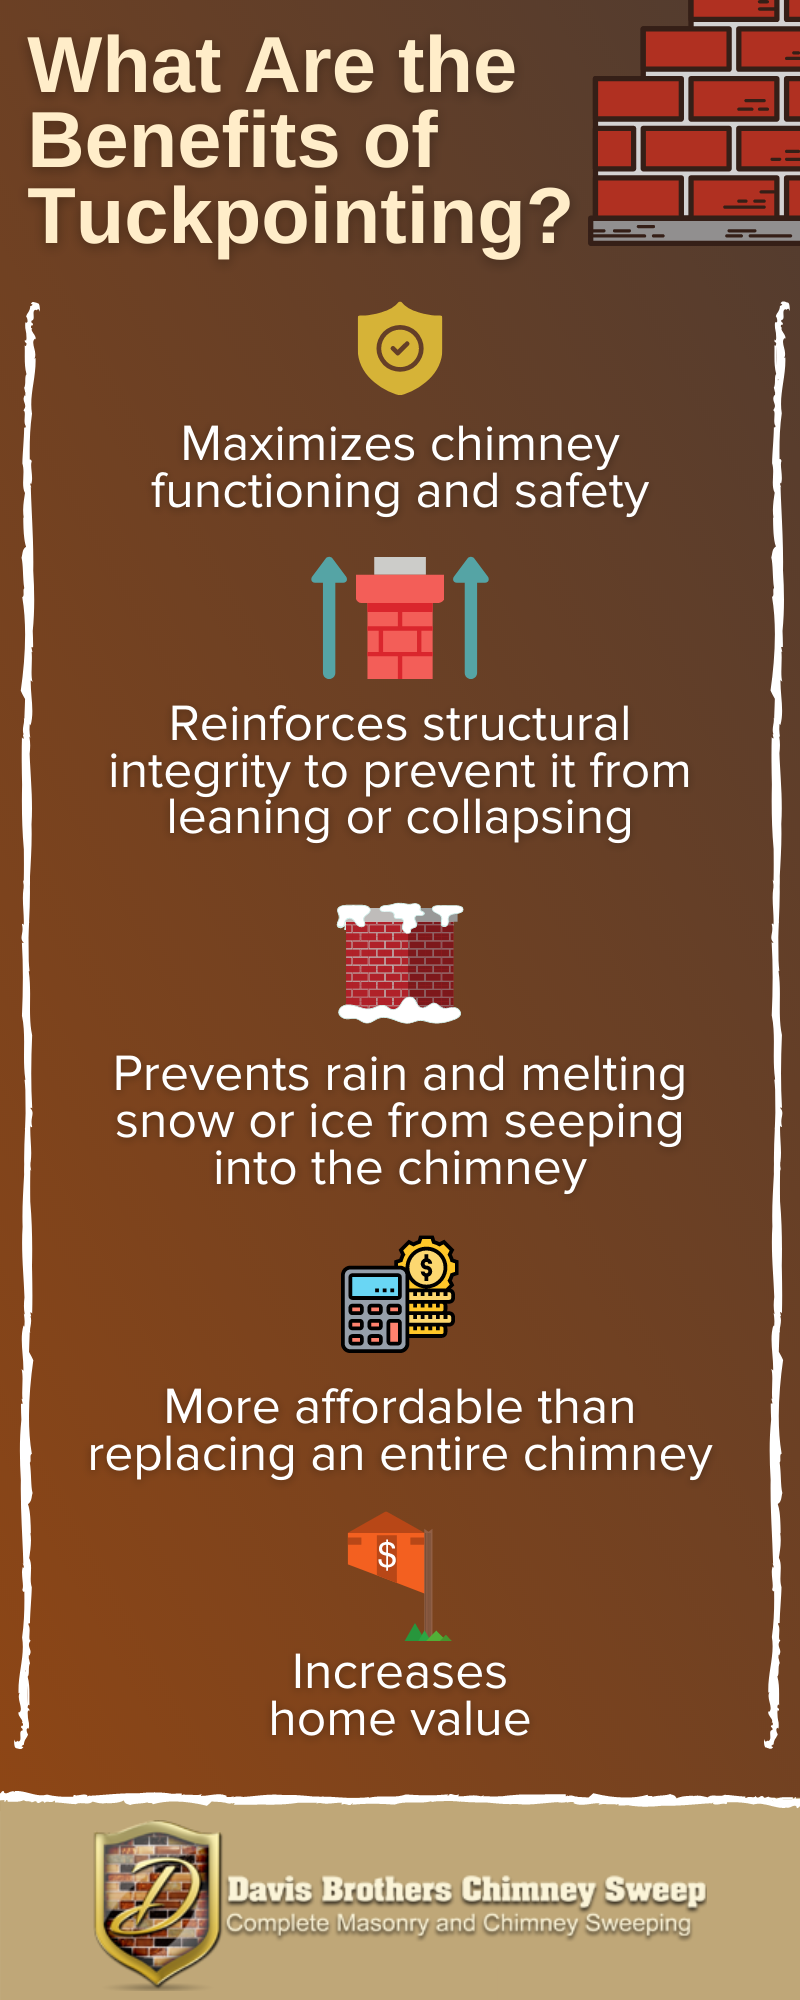 An infographic that reads, "What are the benefits of tuckpointing? Maximizes chimney functioning and safety. Reinforces structural integrity to prevent it from leaning or collapsing. Prevents rain and melting snow from seeping into the chimney. More affordable than replacing an entire chimney. Increases home value."